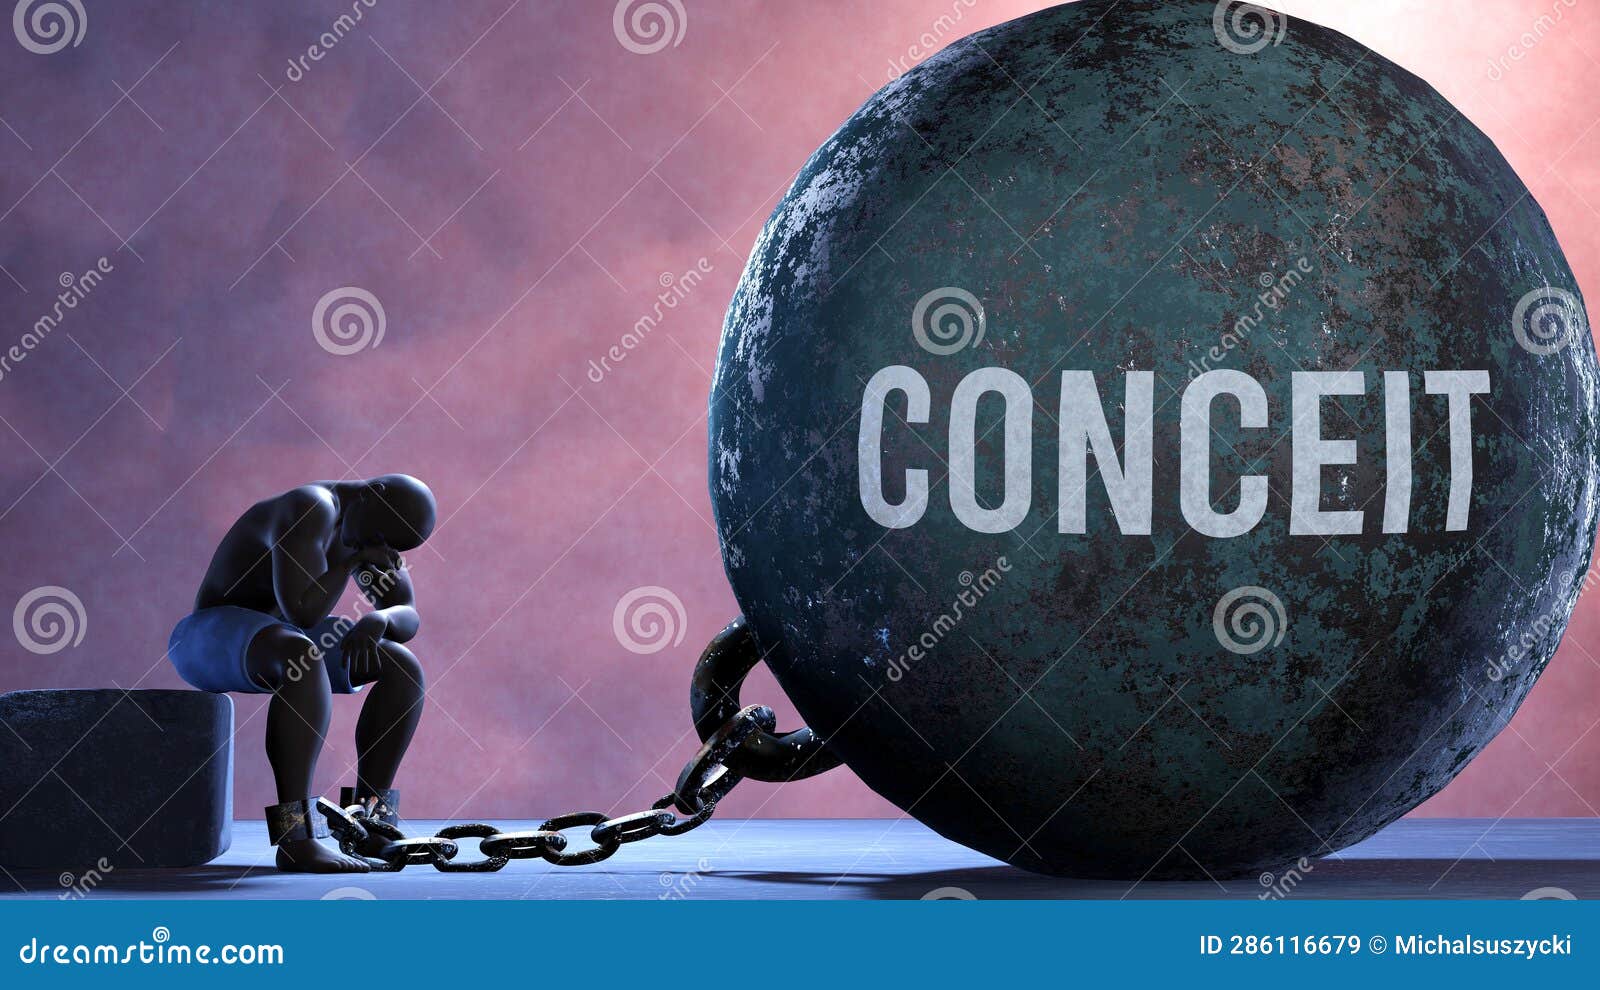 conceit and an alienated suffering human. a metaphor showing conceit as a huge prisoner's ball bringing pain and keeping